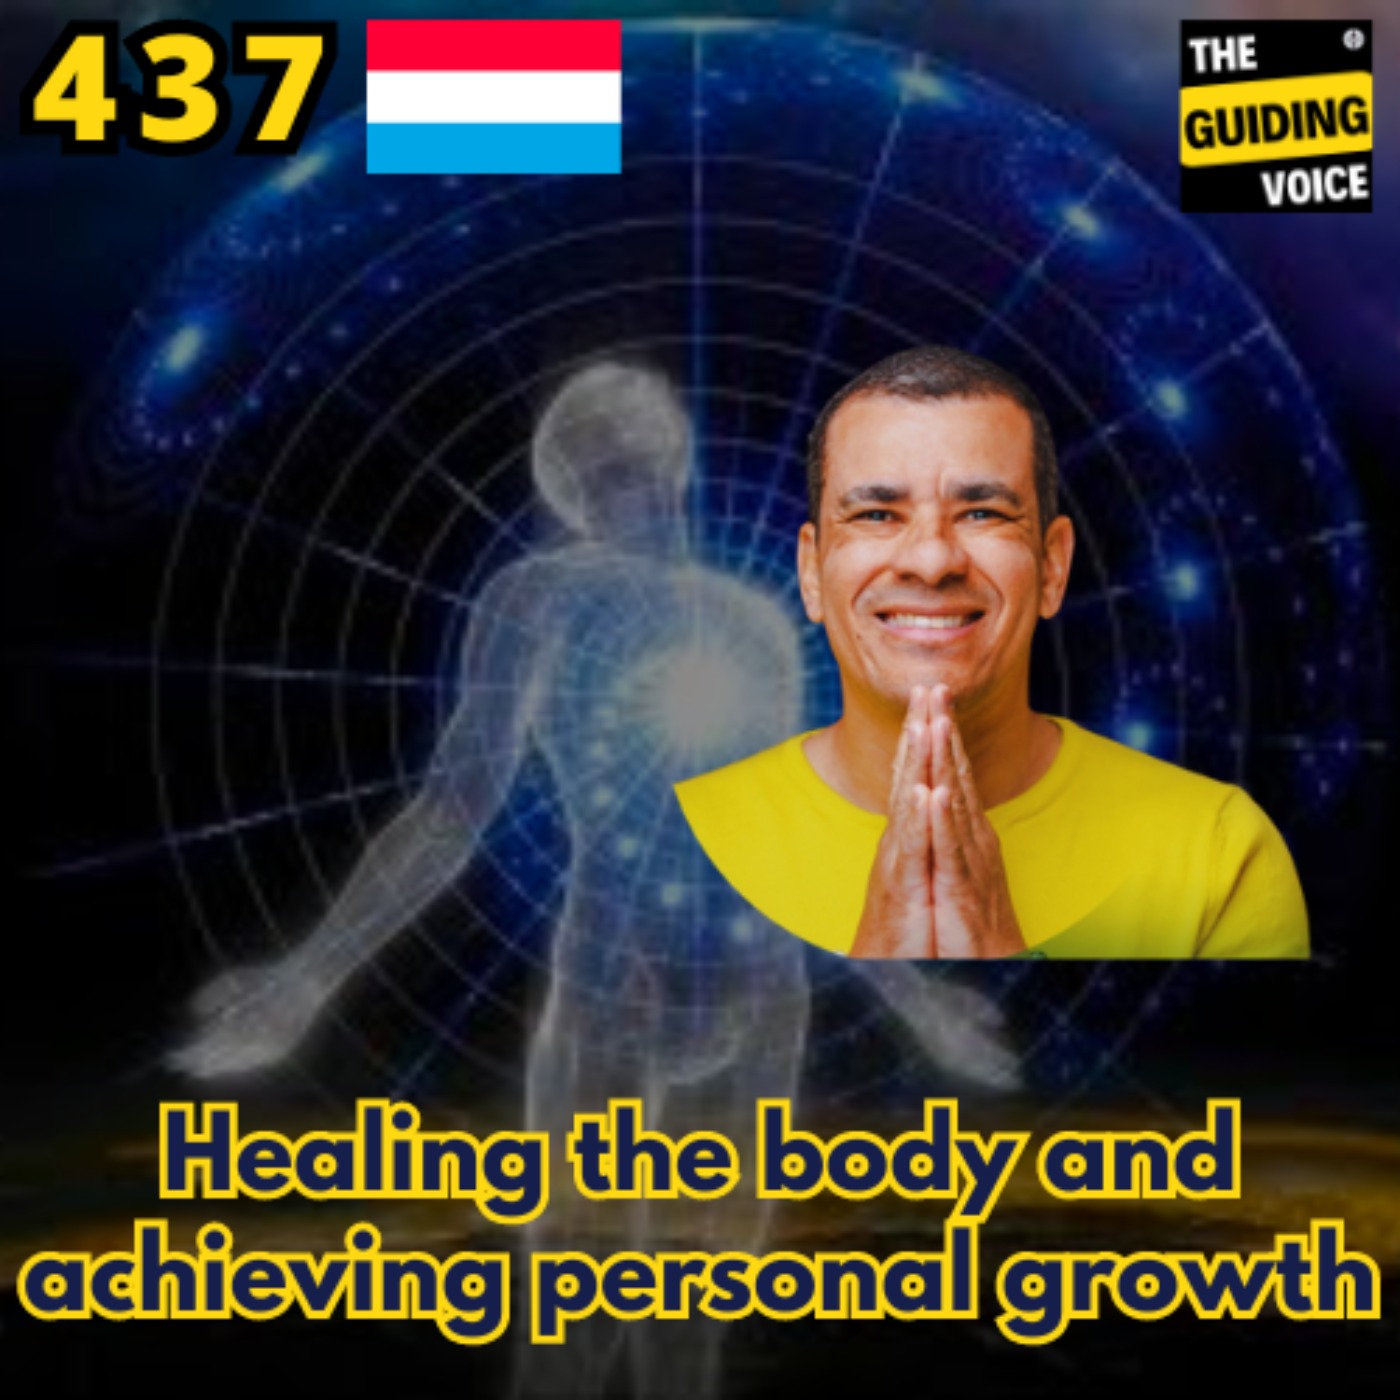 Healing the body and achieving personal growth | LYNDSAY WHITBY | #TGVGlobalSpeakerFestival | #TGV437